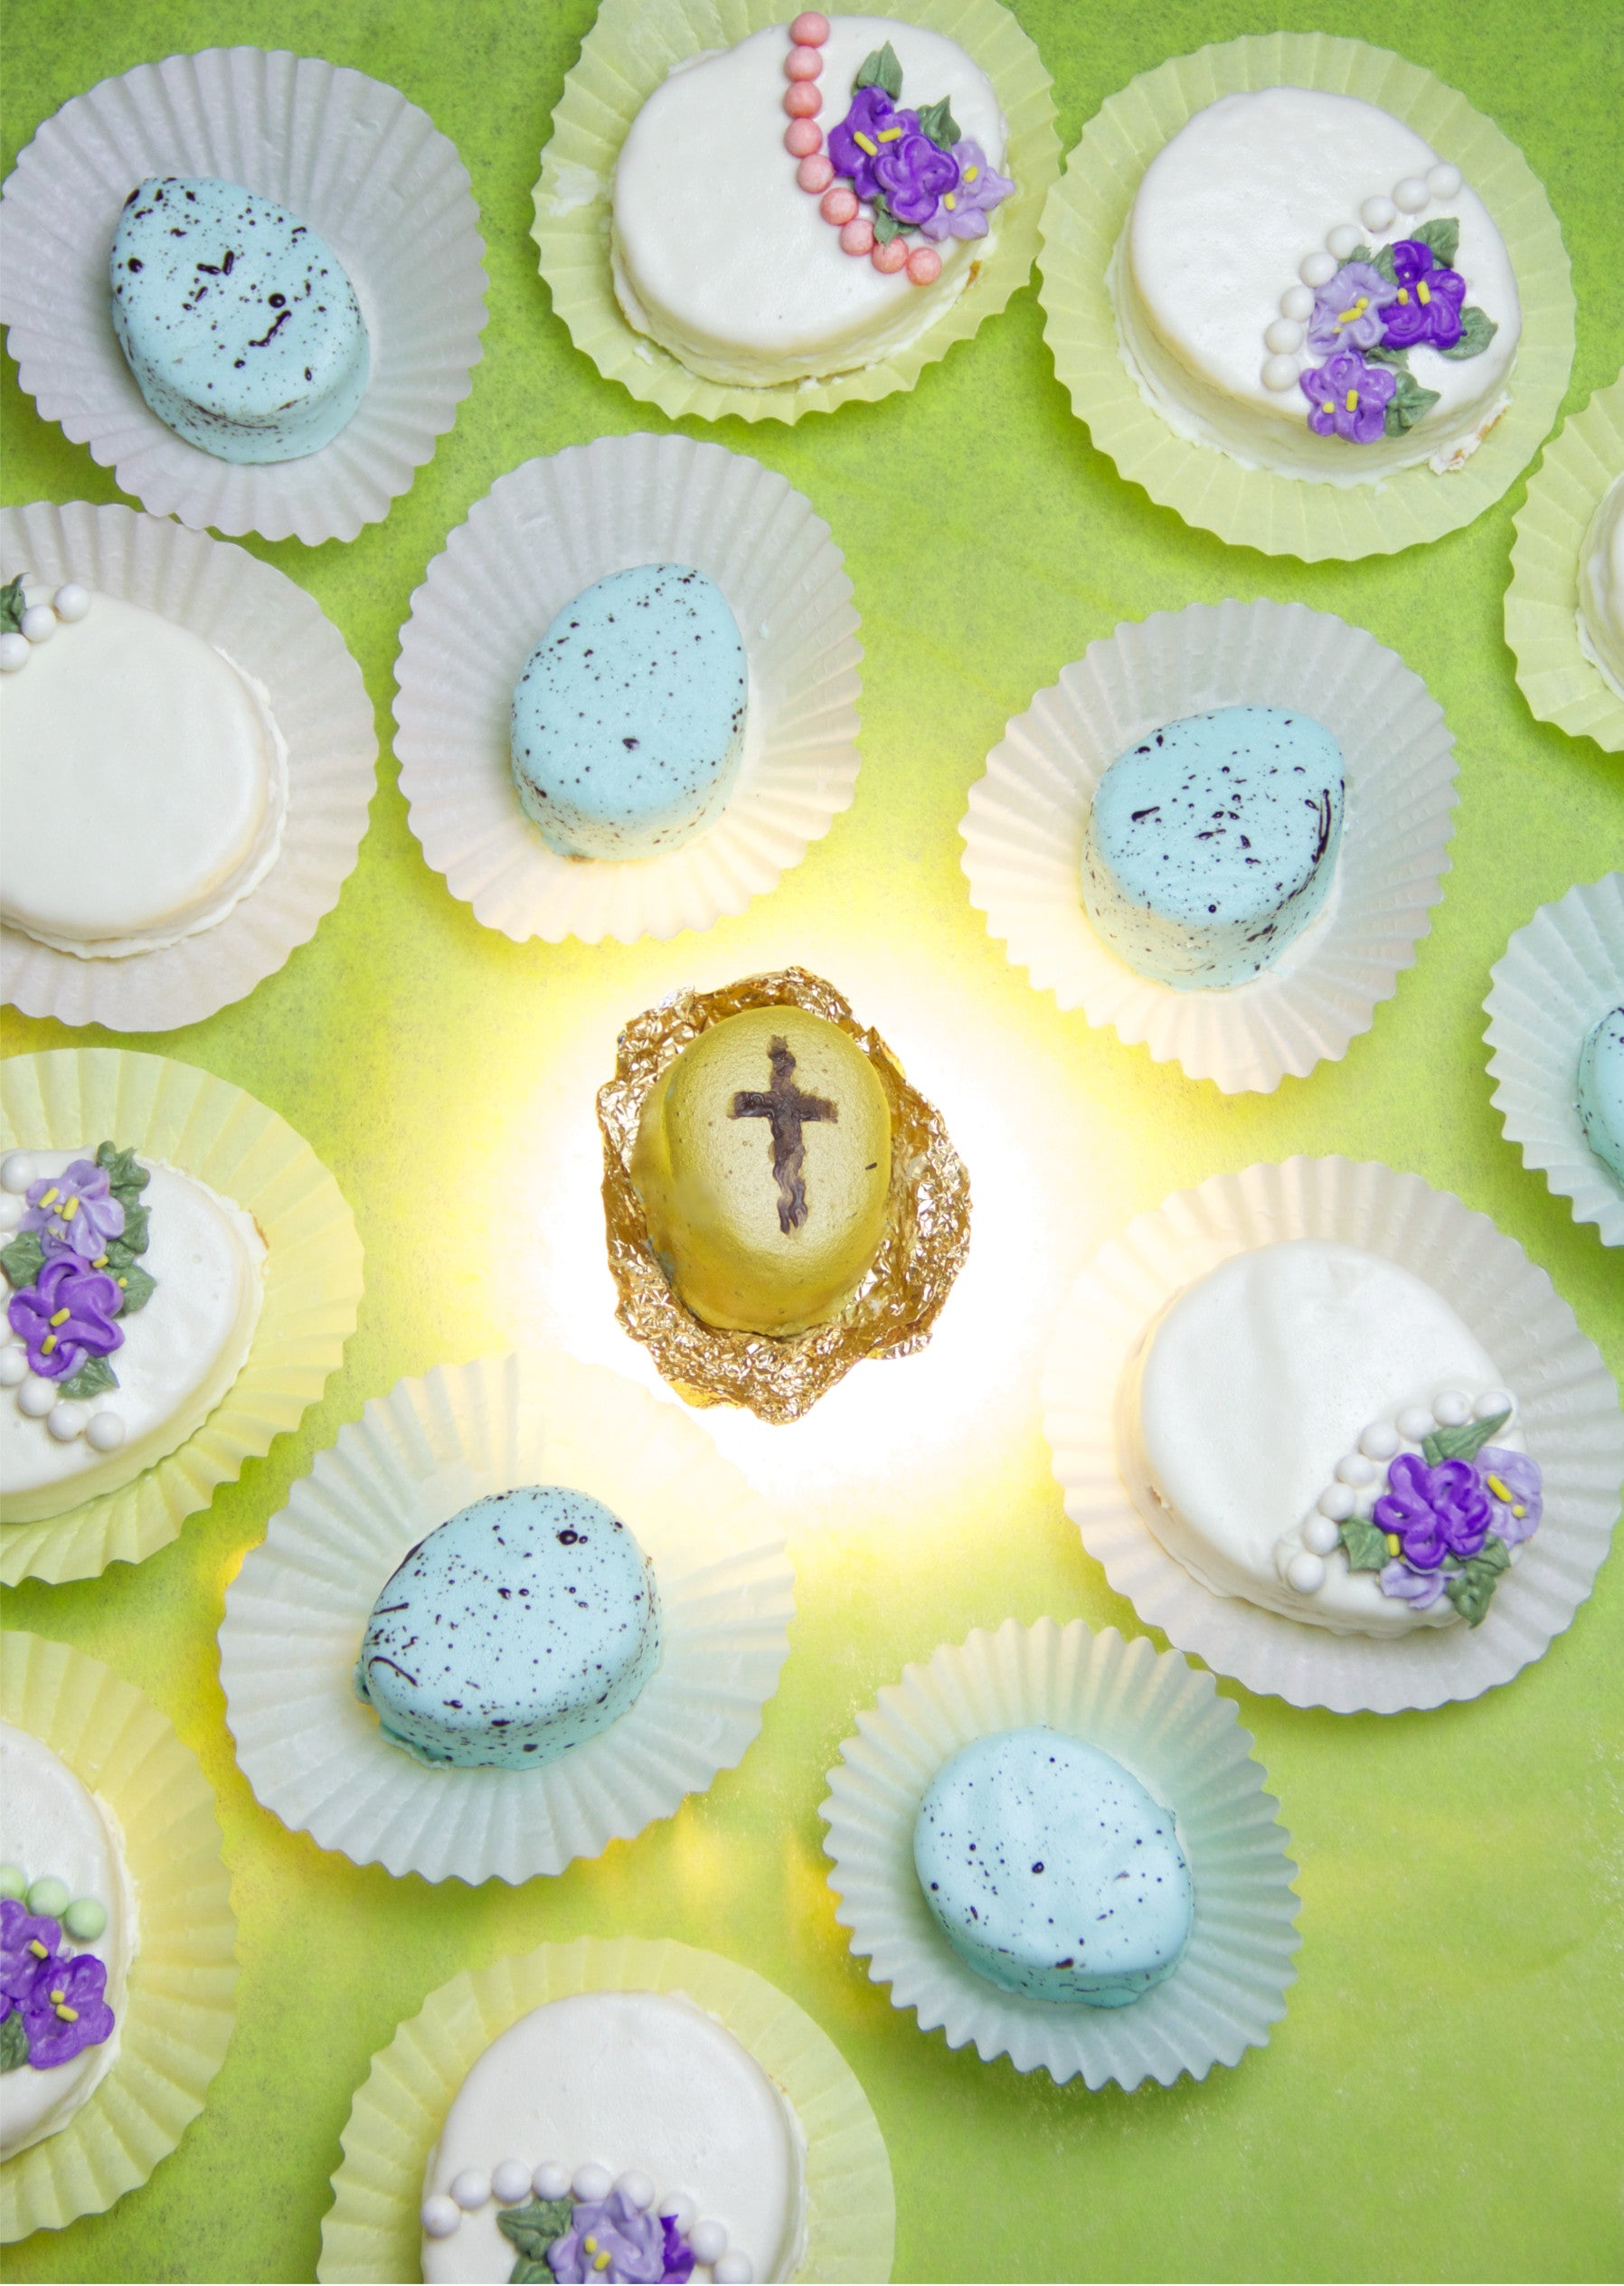 Jesus Rising From the Dead Easter Cakes